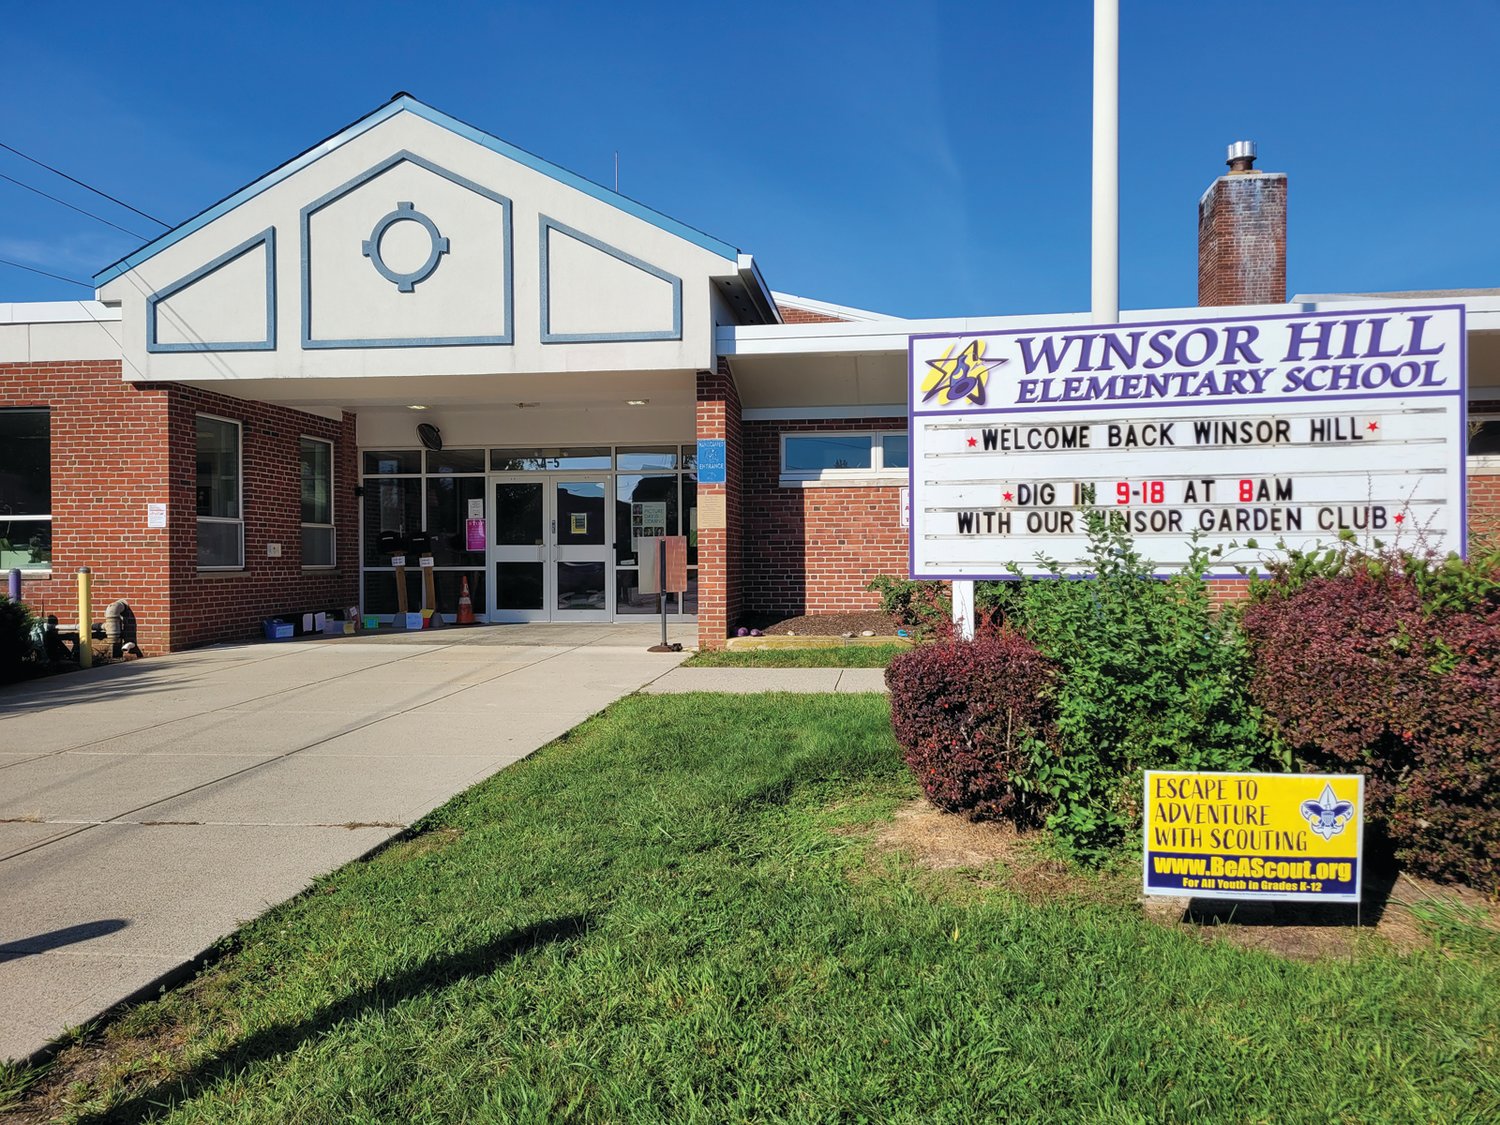 Around 30 total cases of COVID-19 have been reported at one Johnston elementary school.